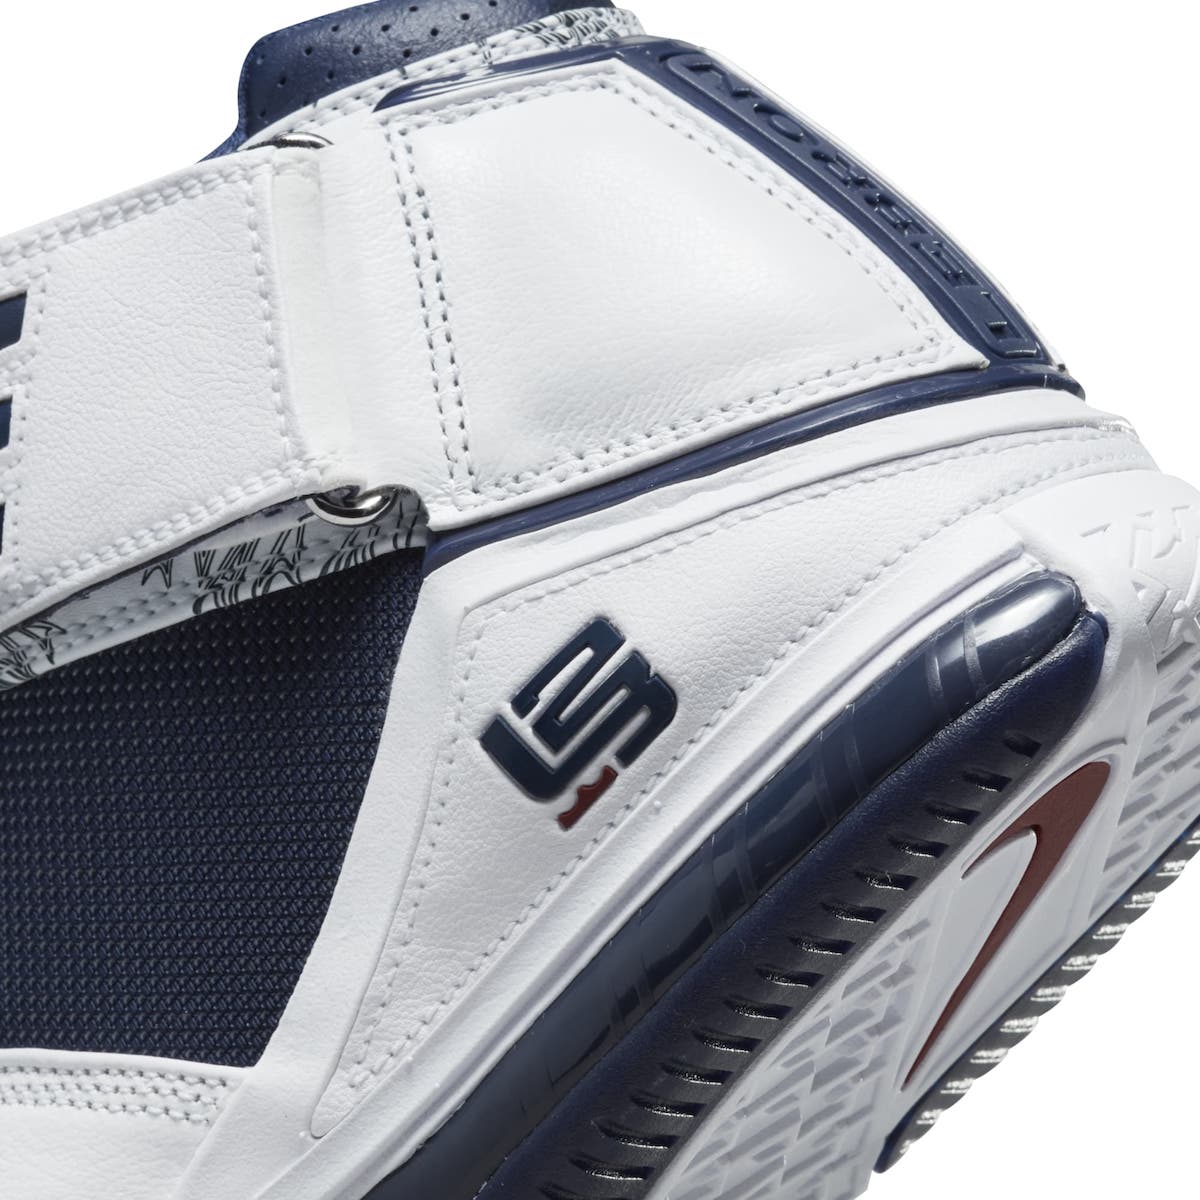 Nike-LeBron-2-USA-Midnight-Navy-2022-DR0826-100-Release-Date-8.jpeg